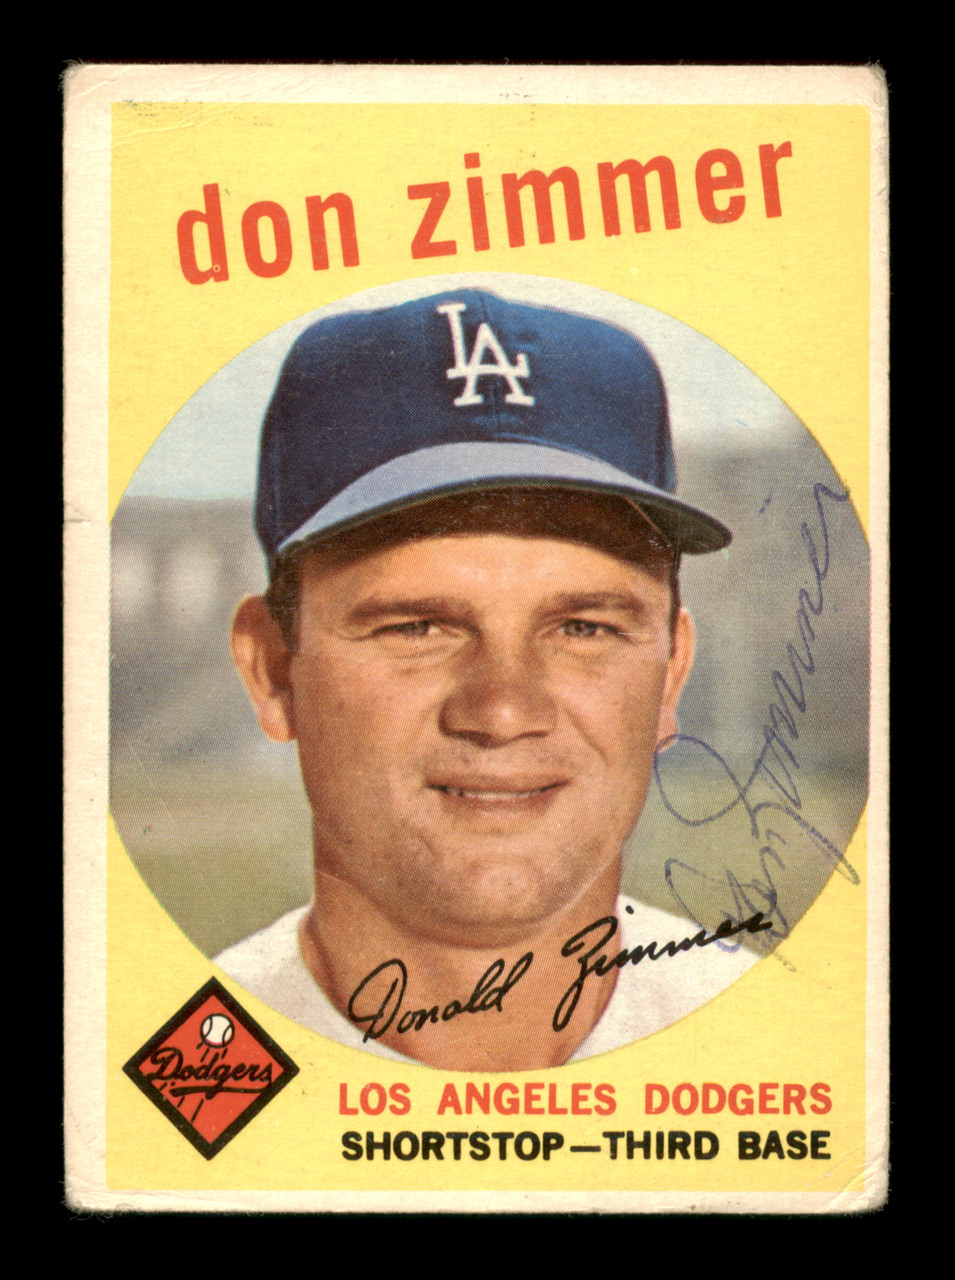 WHEN TOPPS HAD (BASE)BALLS!: DEDICATED MANAGER CARD- 1977 DON ZIMMER